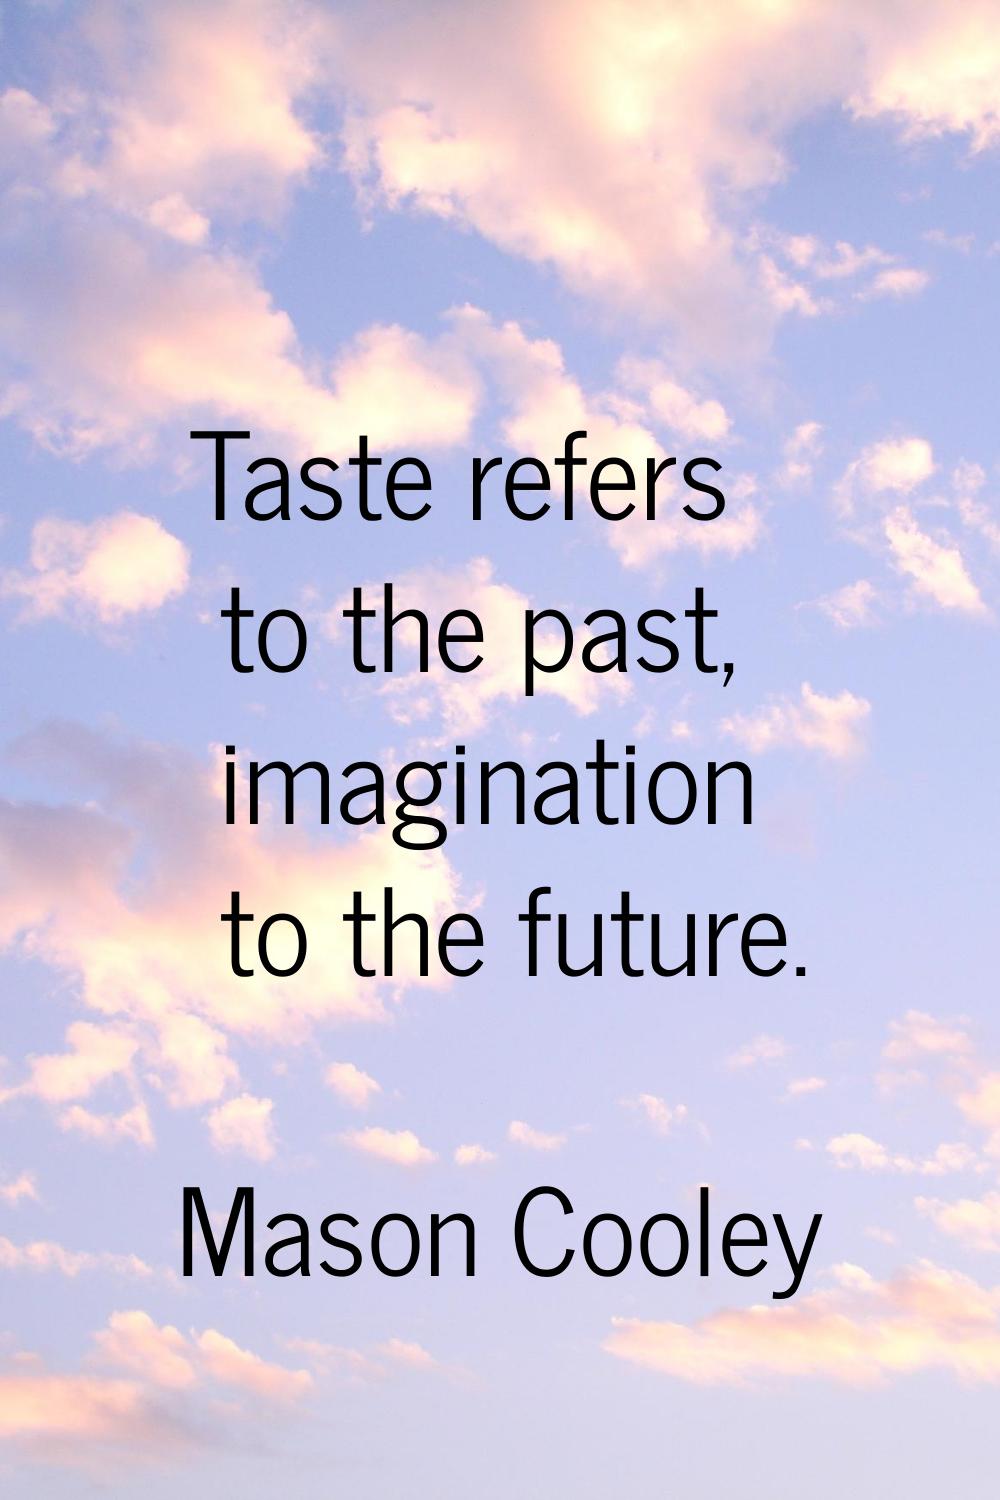 Taste refers to the past, imagination to the future.